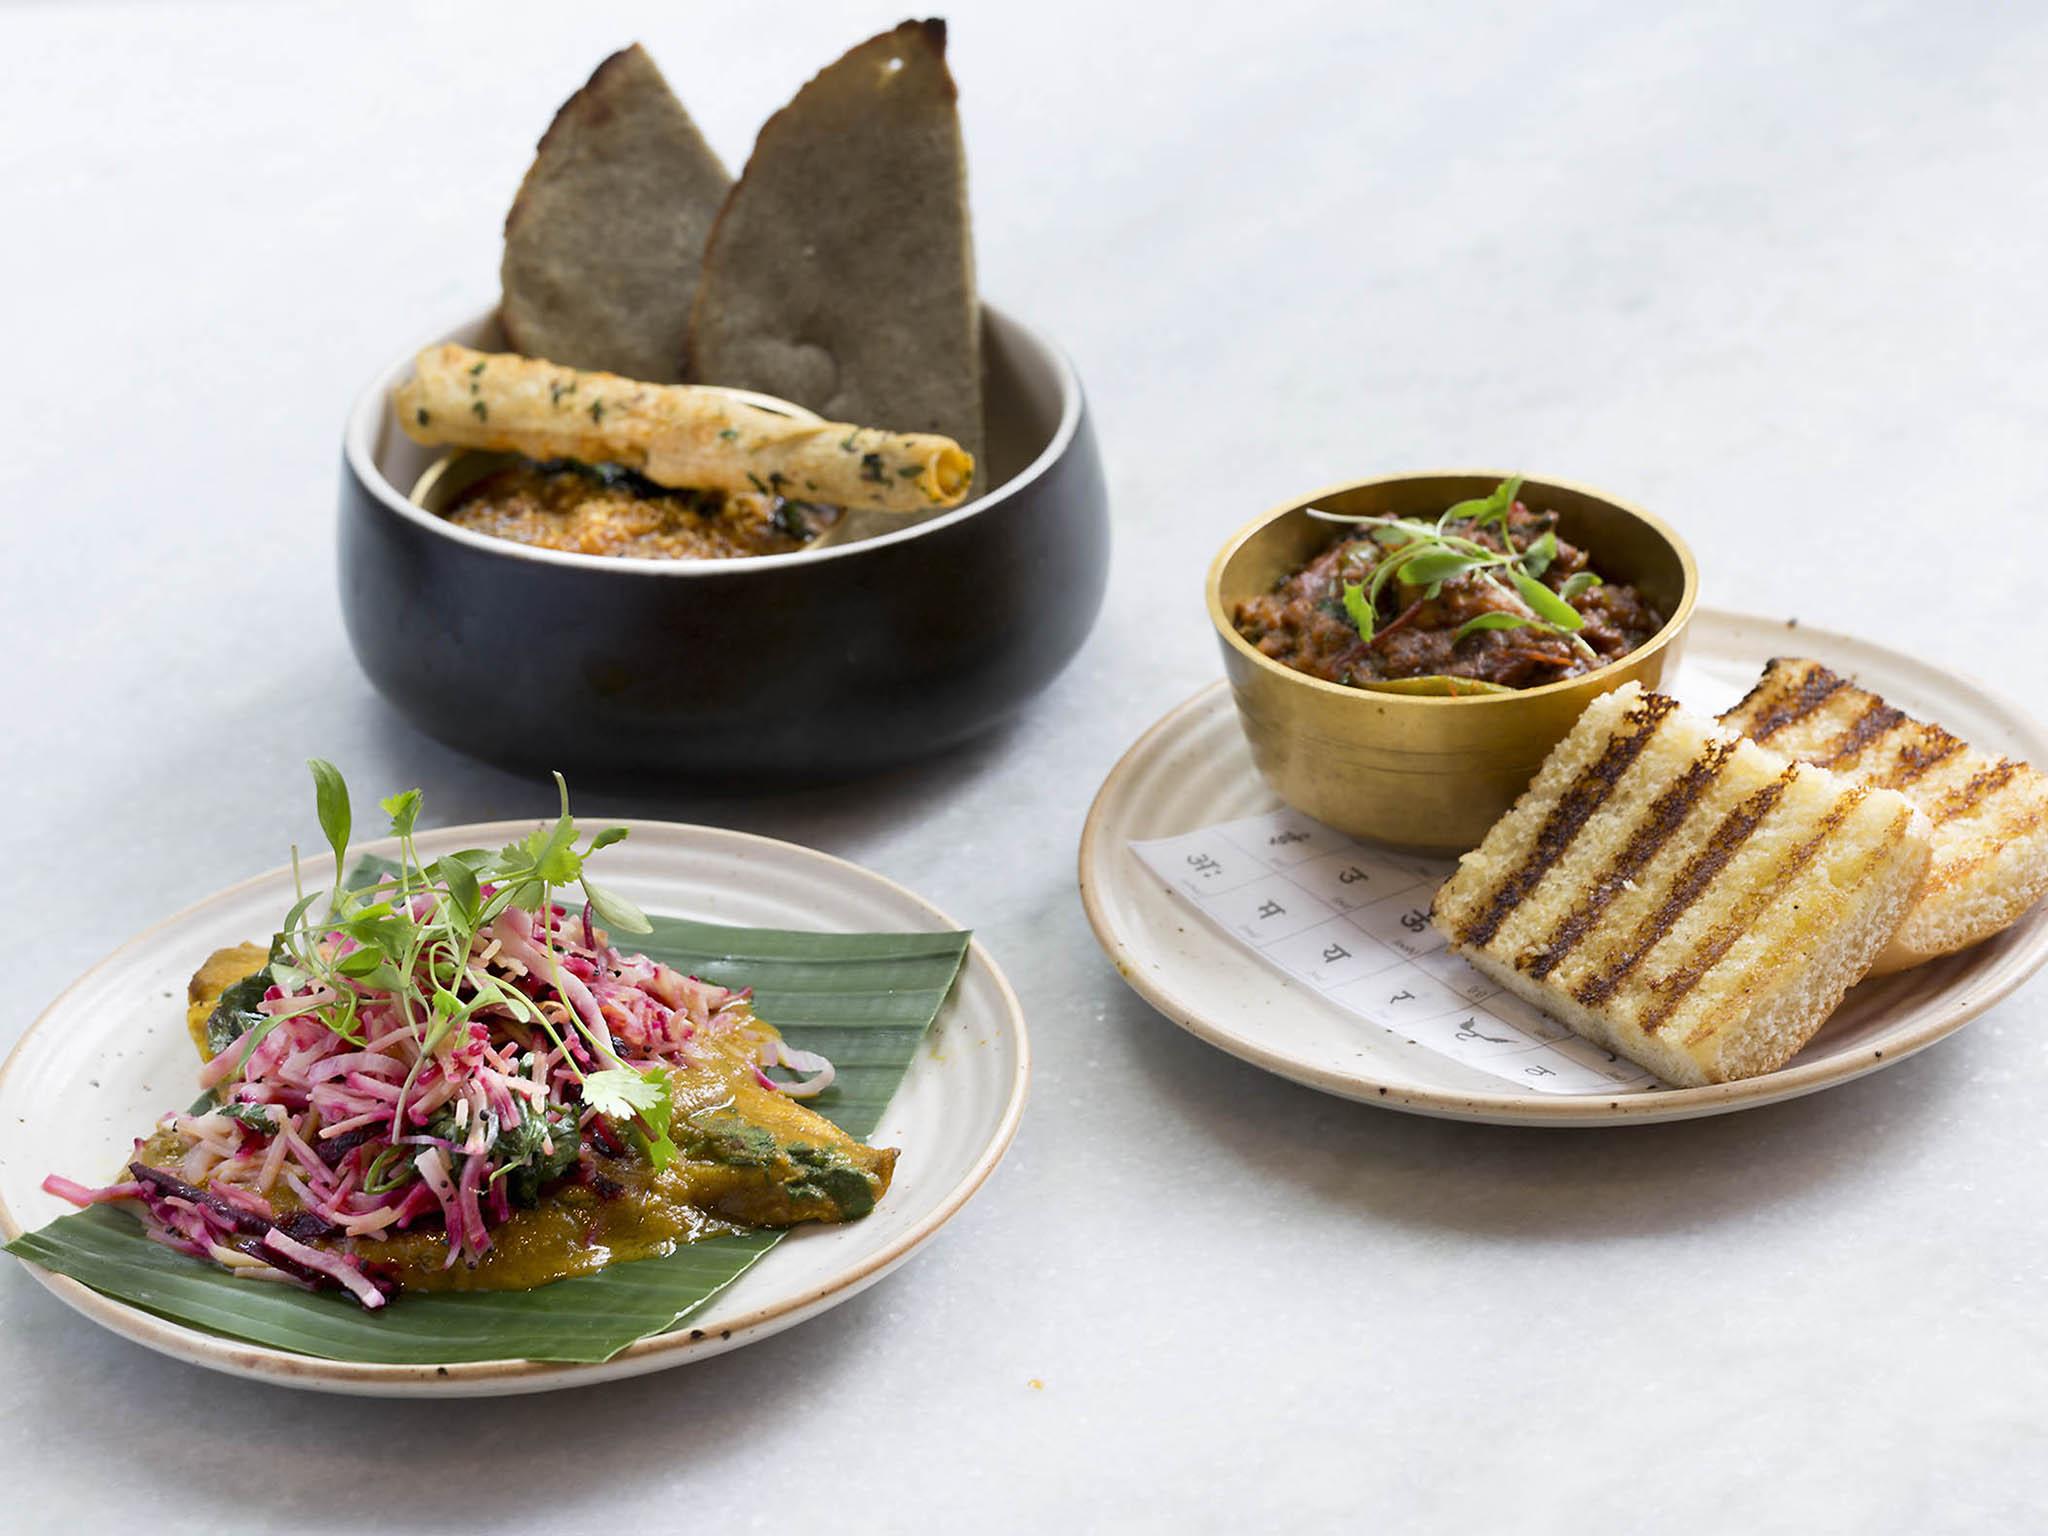 Executive chef Sameer Taneja created the discovery menu especially for National Curry Week